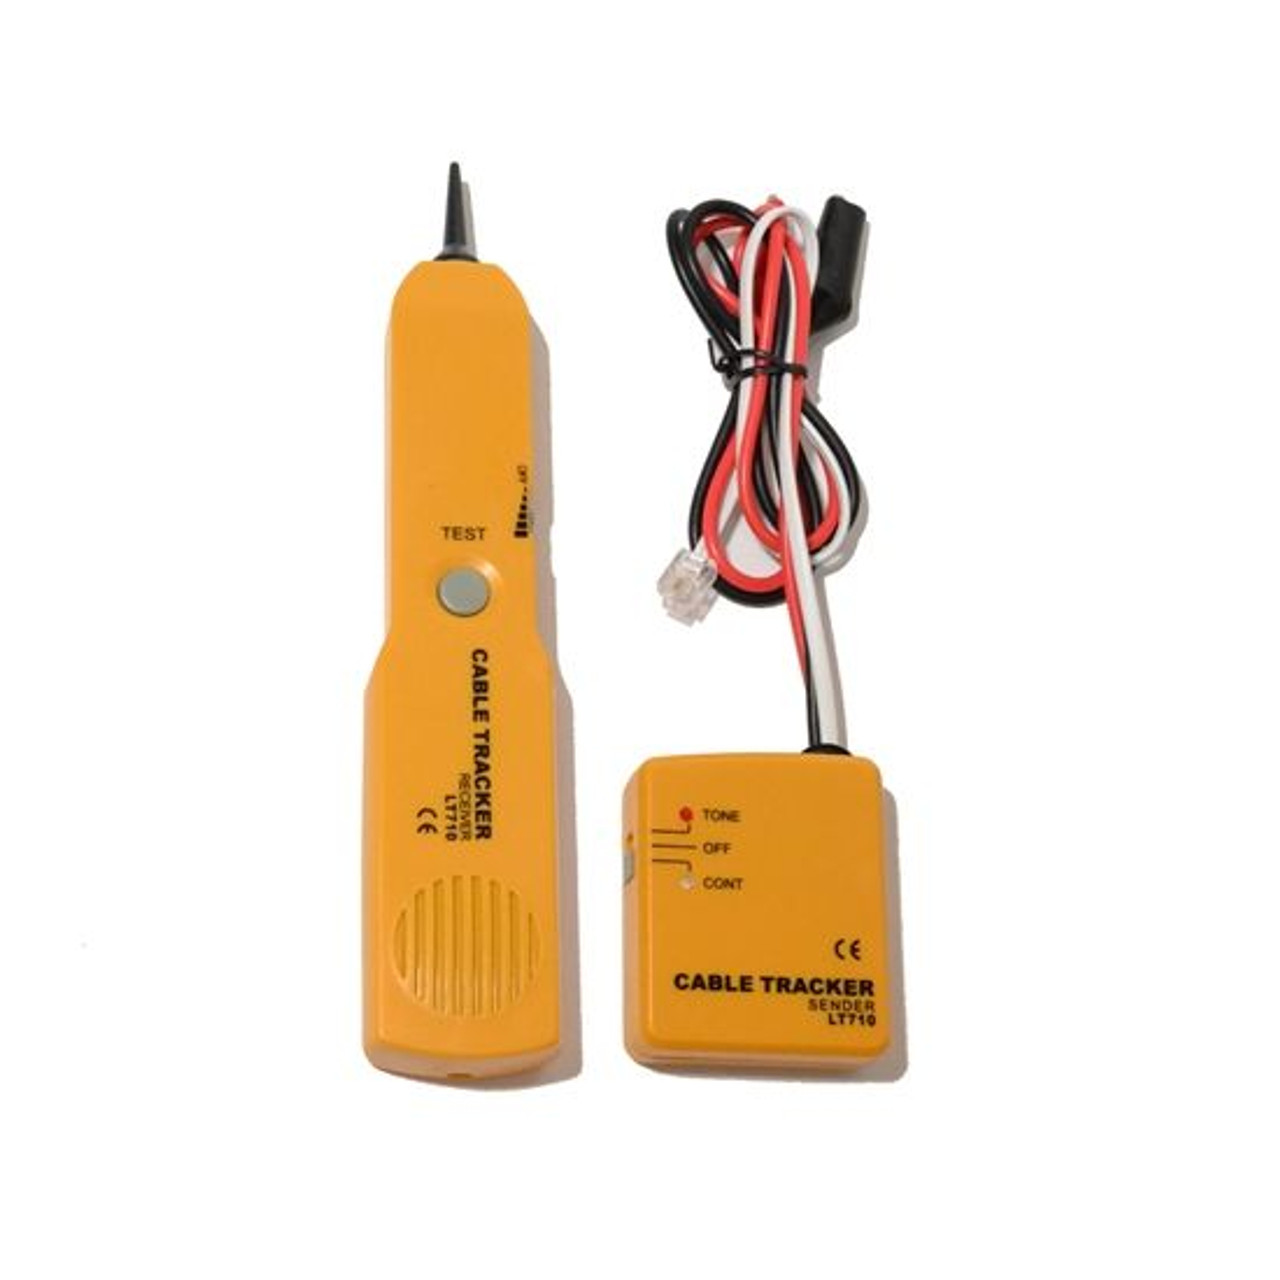 Steren Type Cable Locator Toner and Probe Tracker Kit Test and Locate Identify Trace Cable Pairs Individual Wire and Conductors Modular Telephone Data Line Cord Short Tester with LED Display